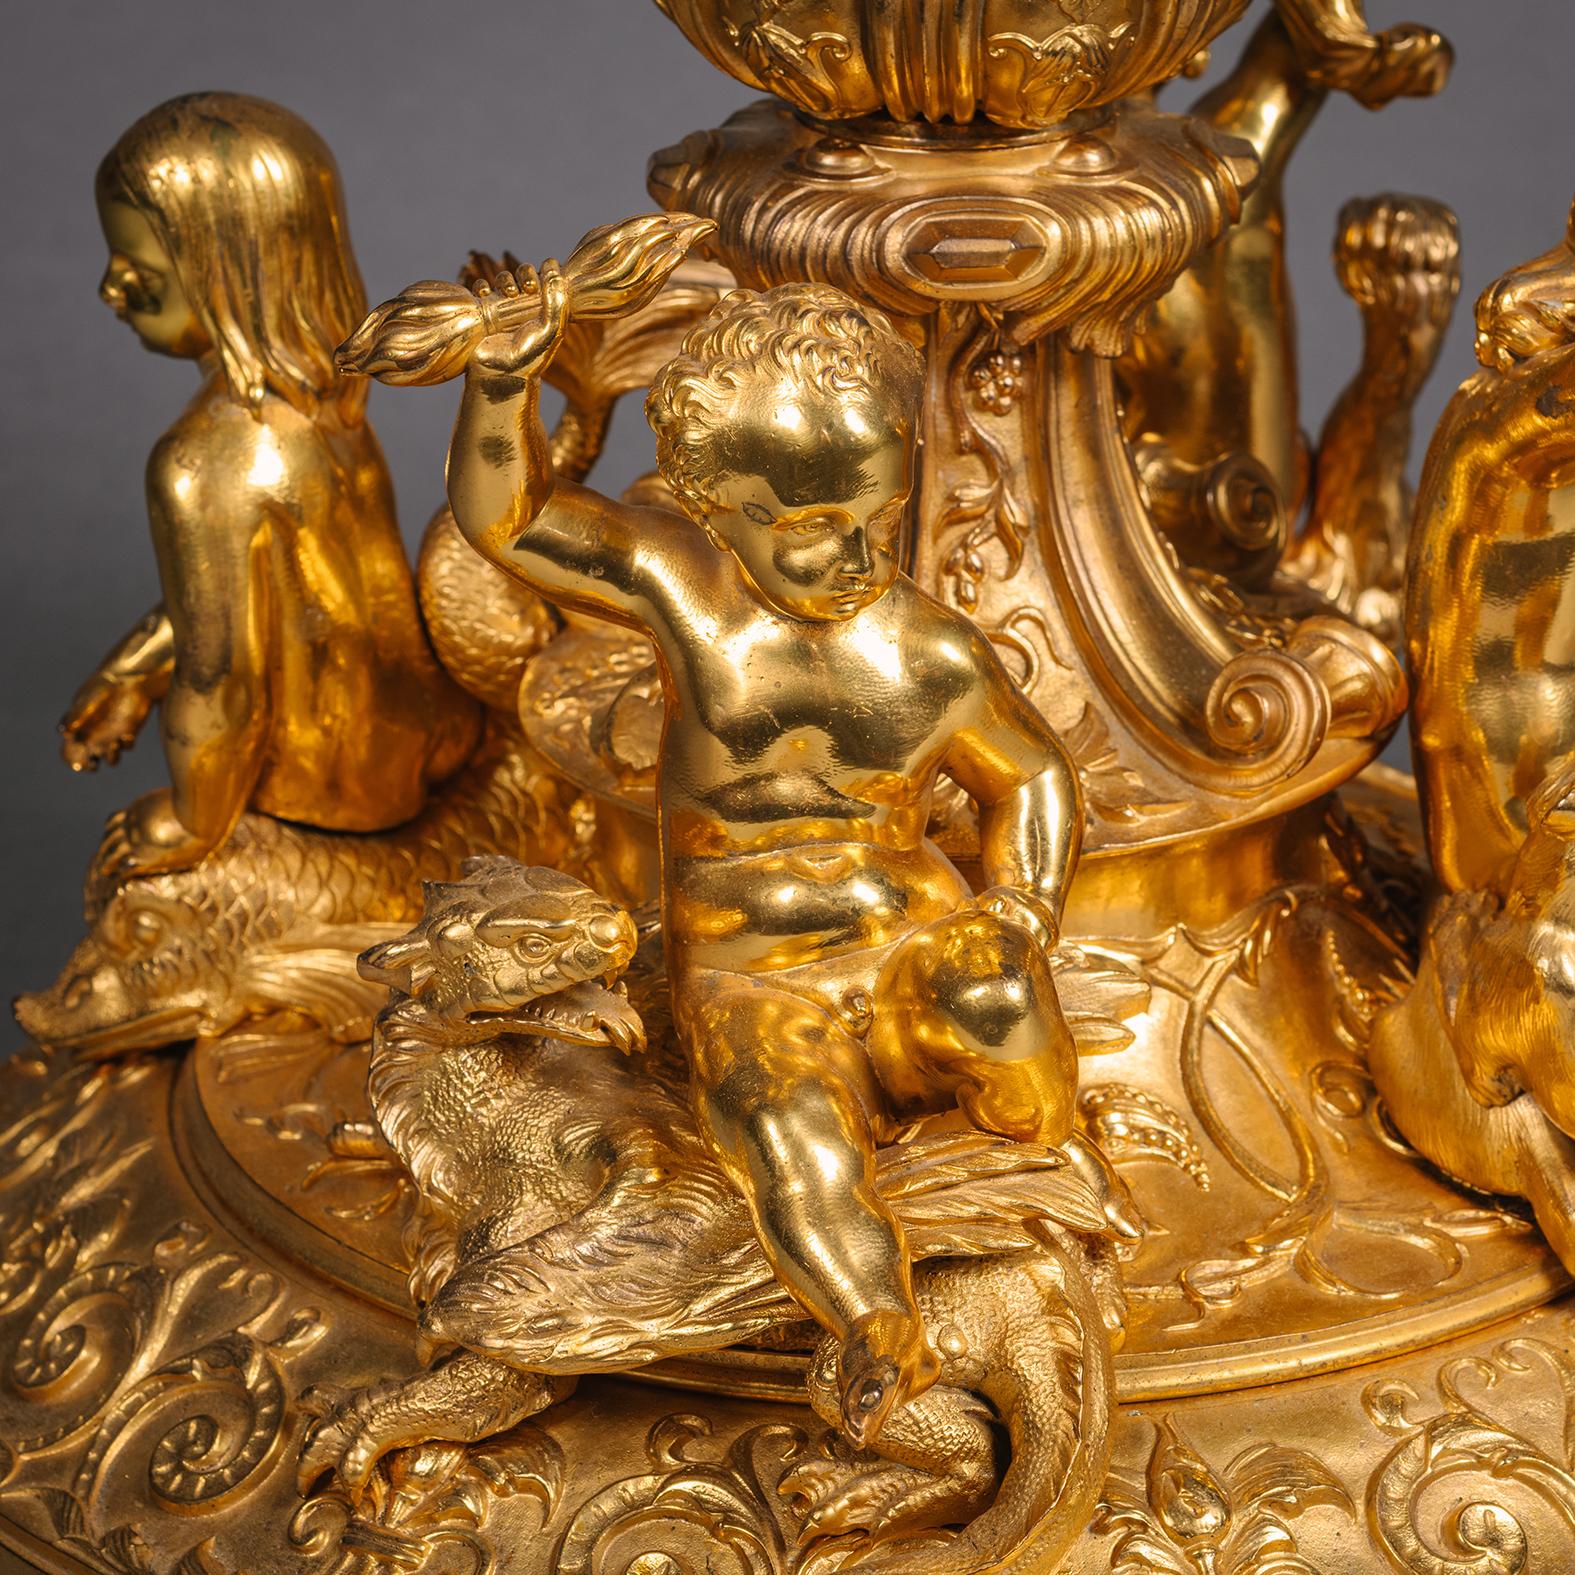 A Large Louis Philippe Period Gilt-Bronze Table Centrepiece or Corbeille (Fruit Basket). Attributed to Guillaume Denière (1815-1903), Paris, Circa 1840.

The four sculptural figures of seated children are attributed to Jean-Jacques Feuchère